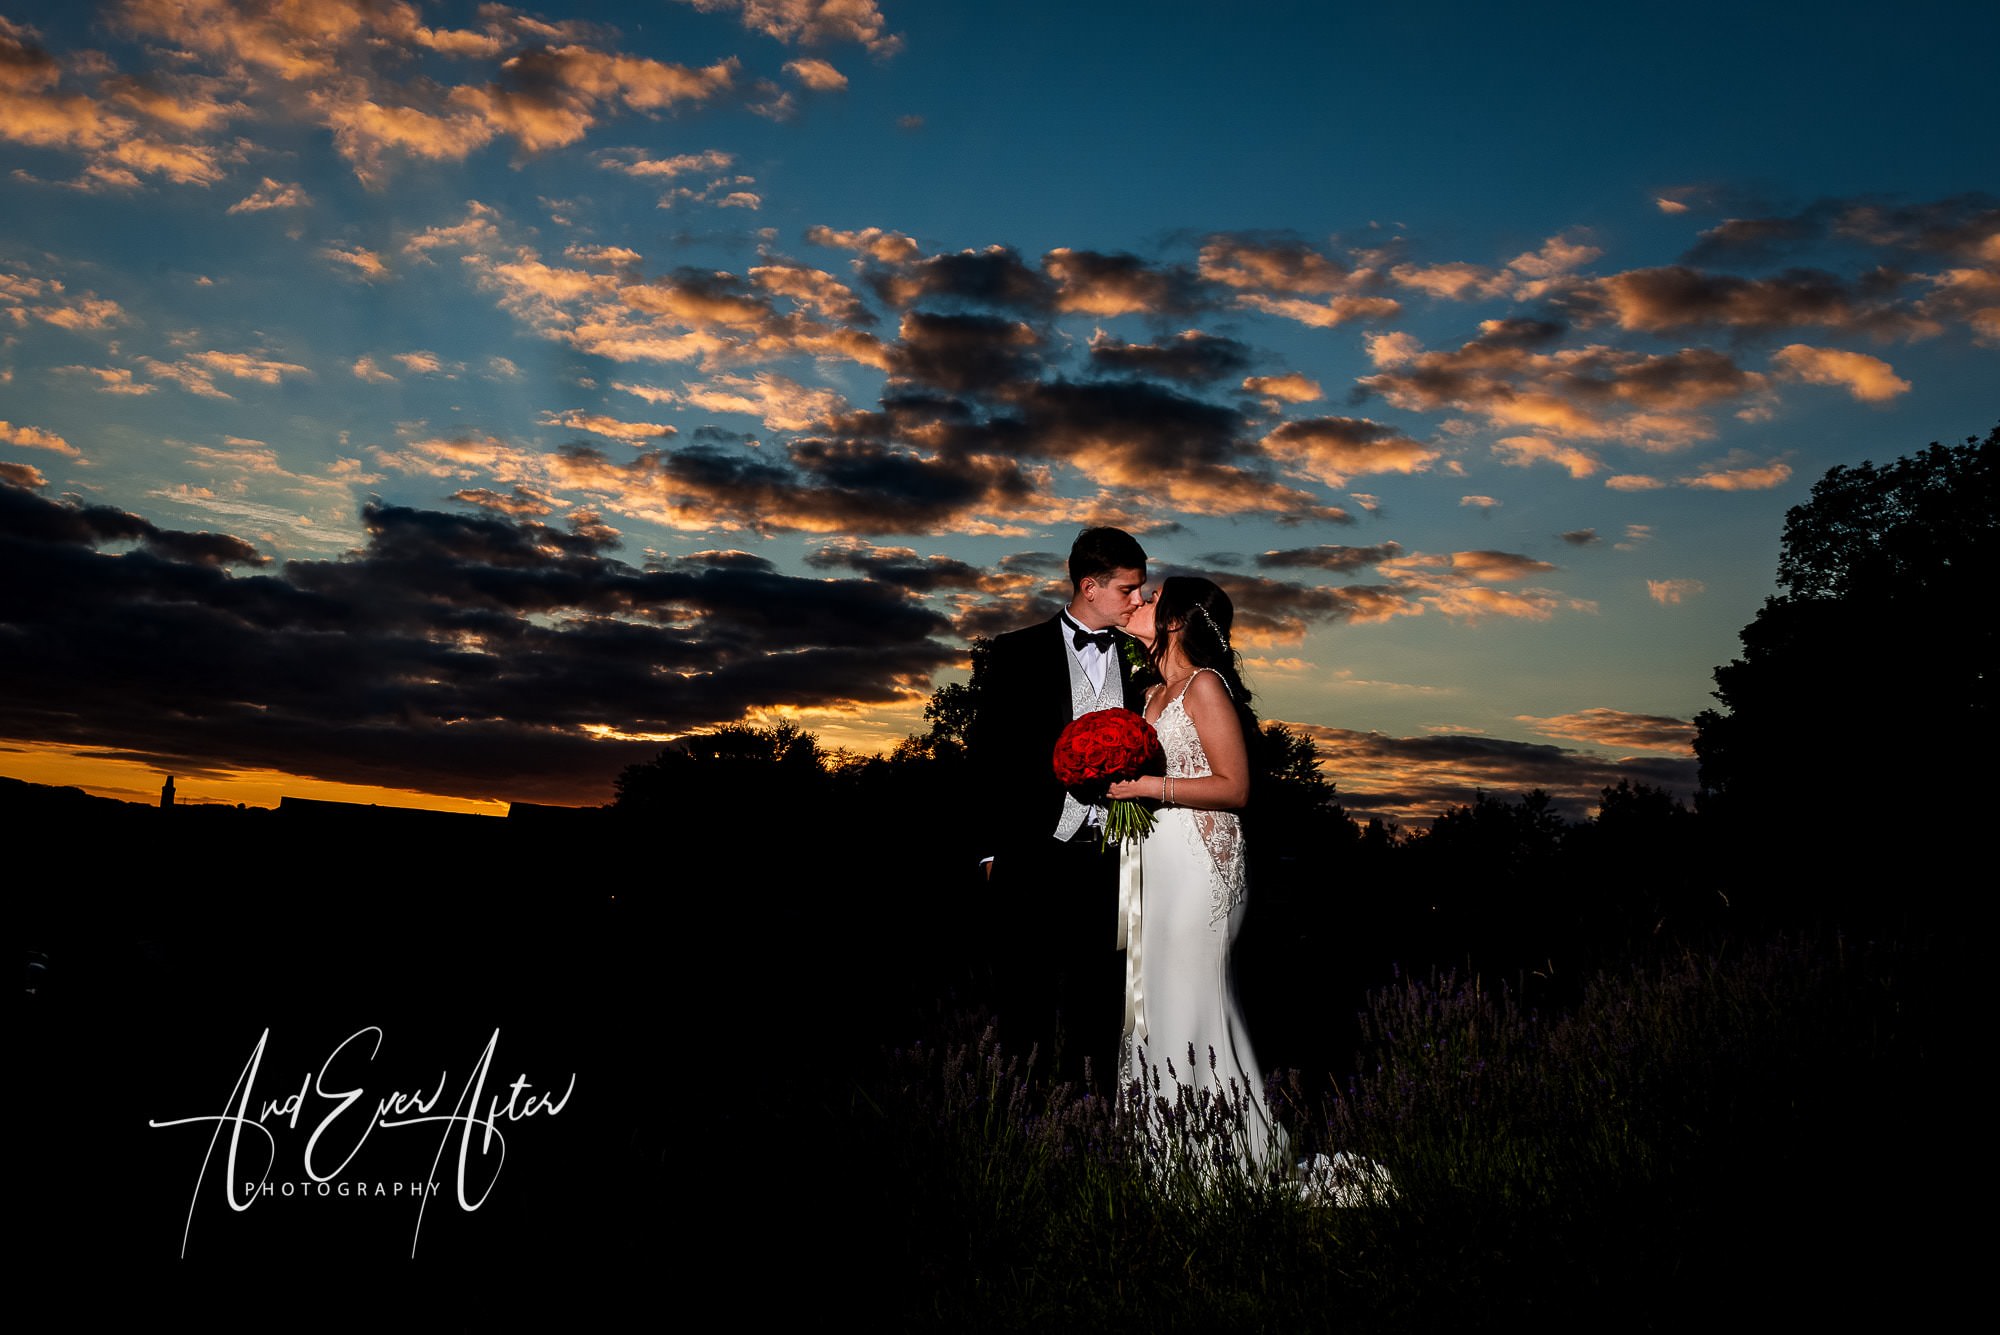 Wedding photography, the black horse at beamish wedding, bride and groom, Wedding photograph, And Ever After Photography, lavender fields